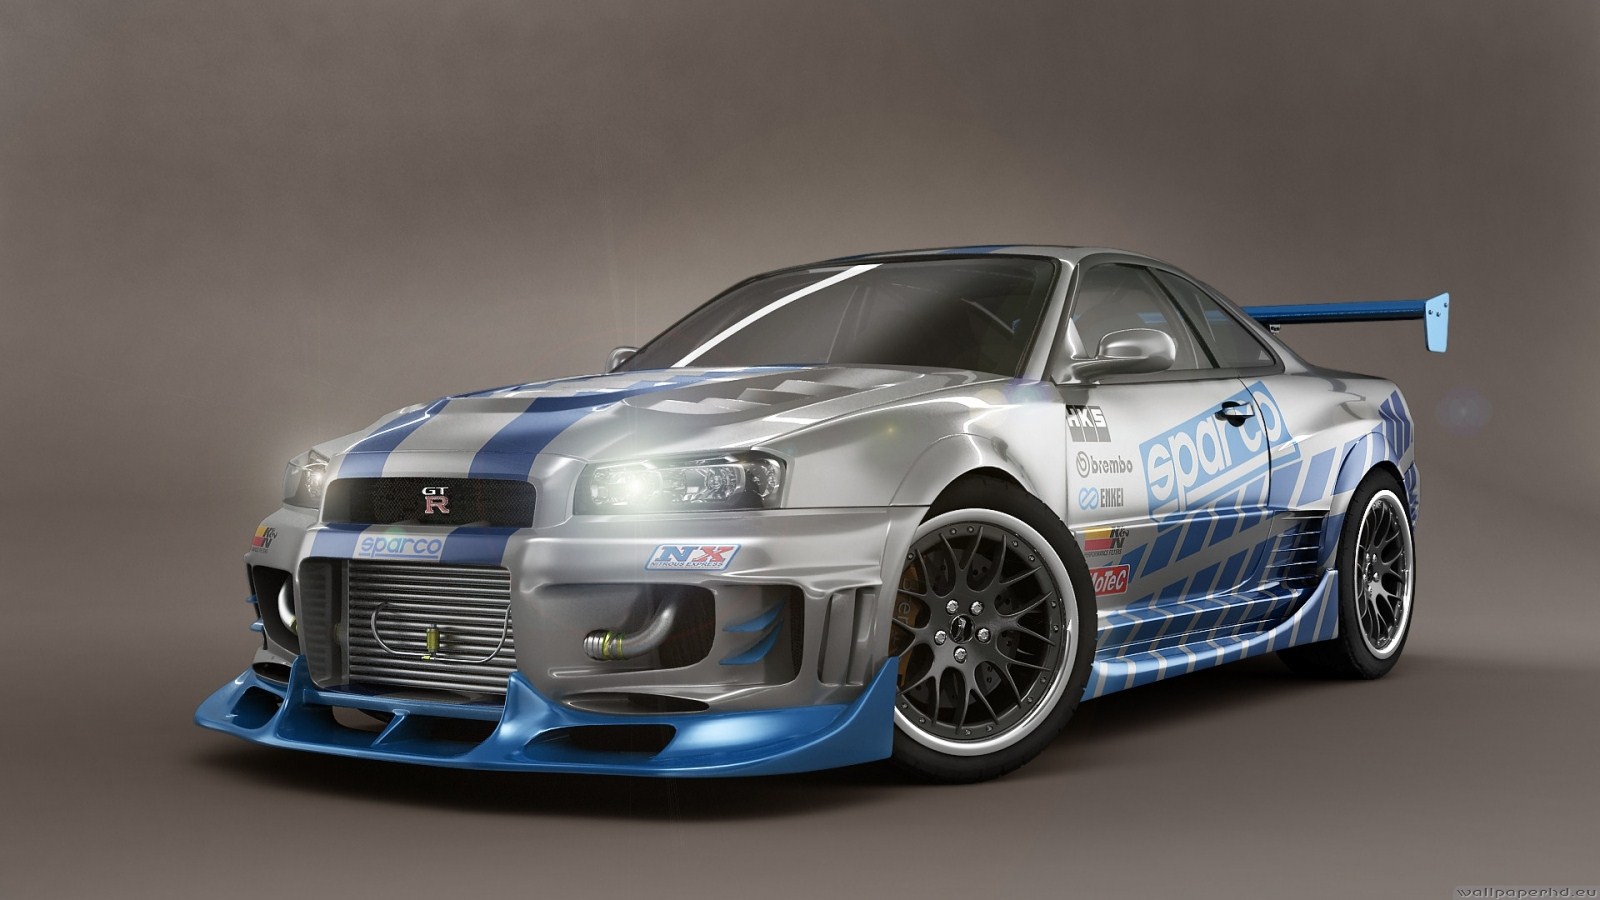 Description You Are Watching New Uping Nissan Skyline Gtr